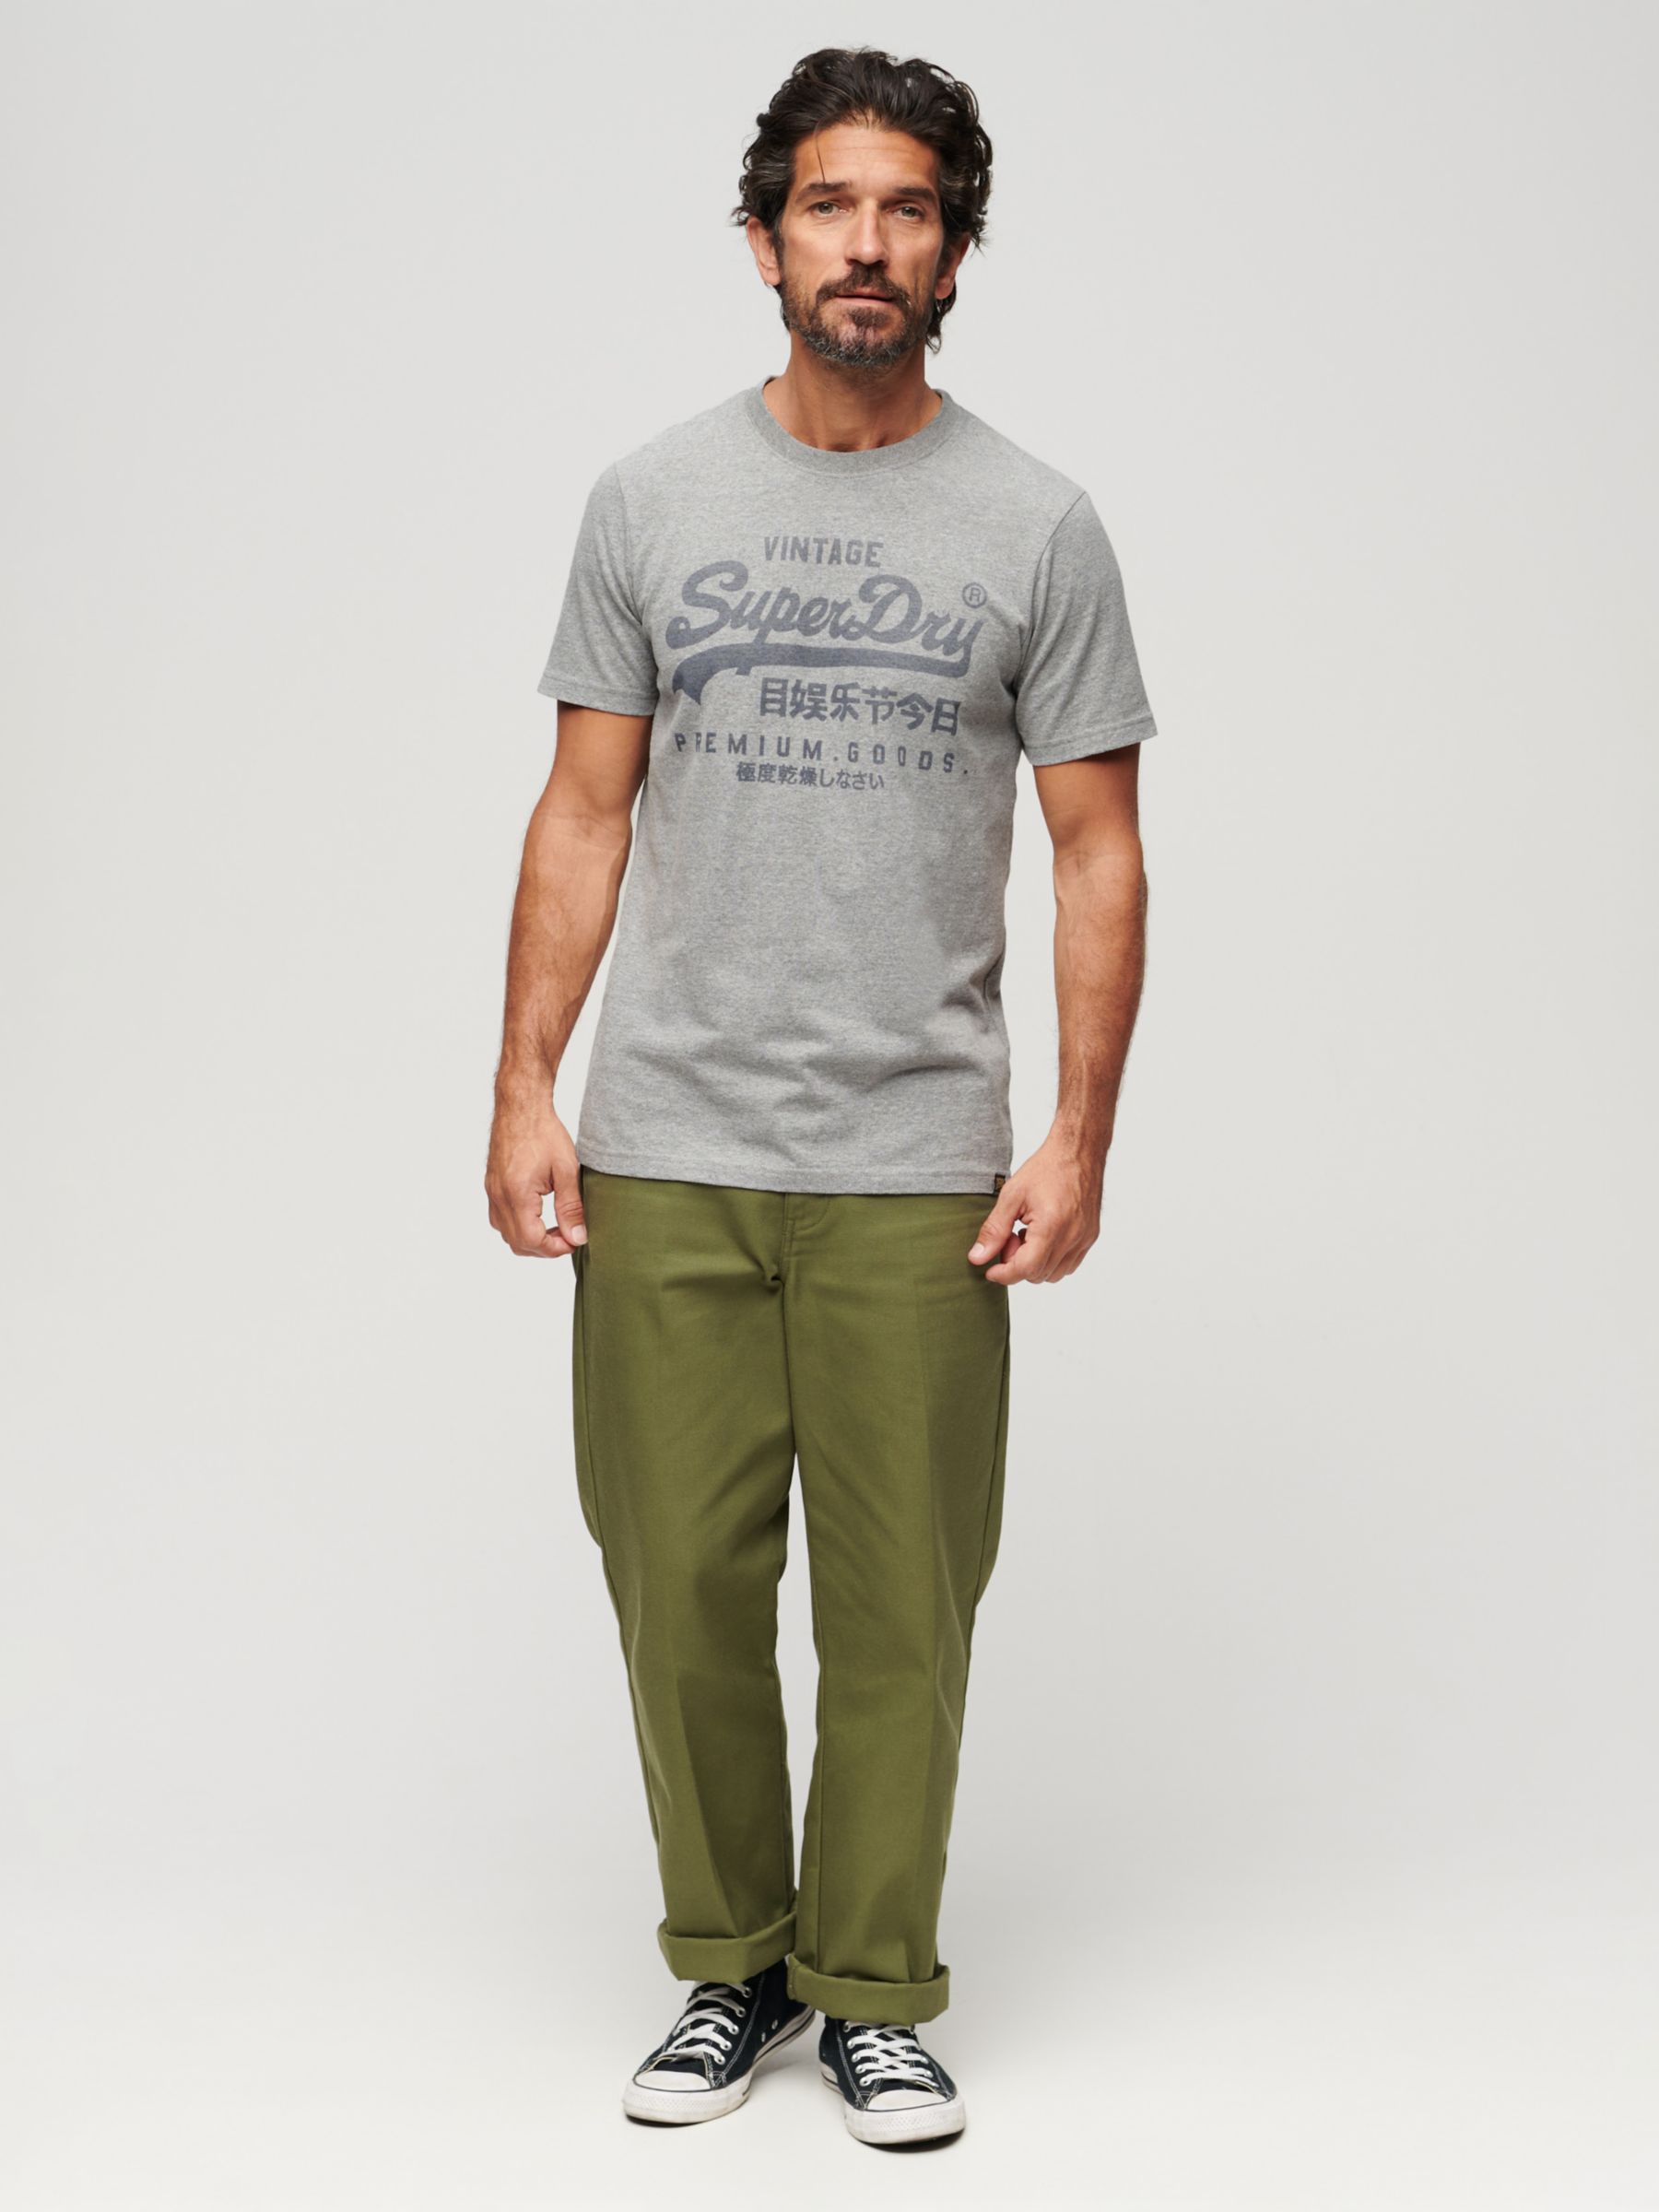 Buy Superdry Classic Heritage T-Shirt Online at johnlewis.com